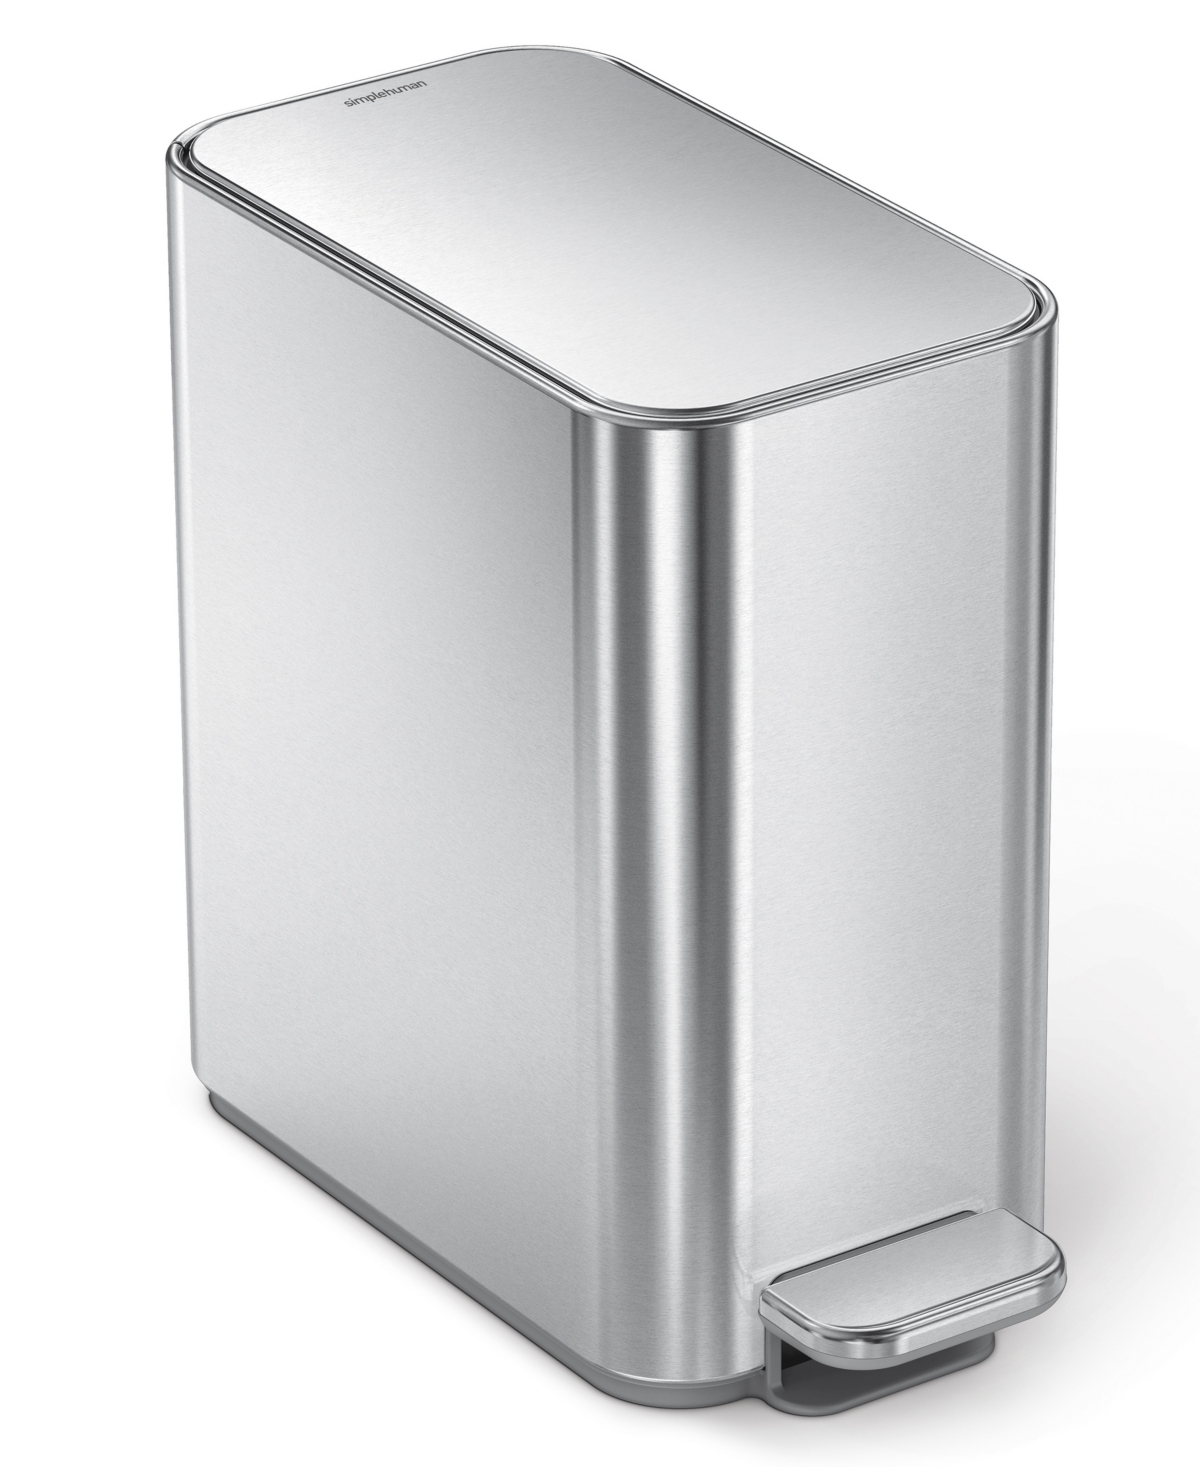 Simplehuman Slim Step Can, 5 Liter In Brushed Stainless Steel